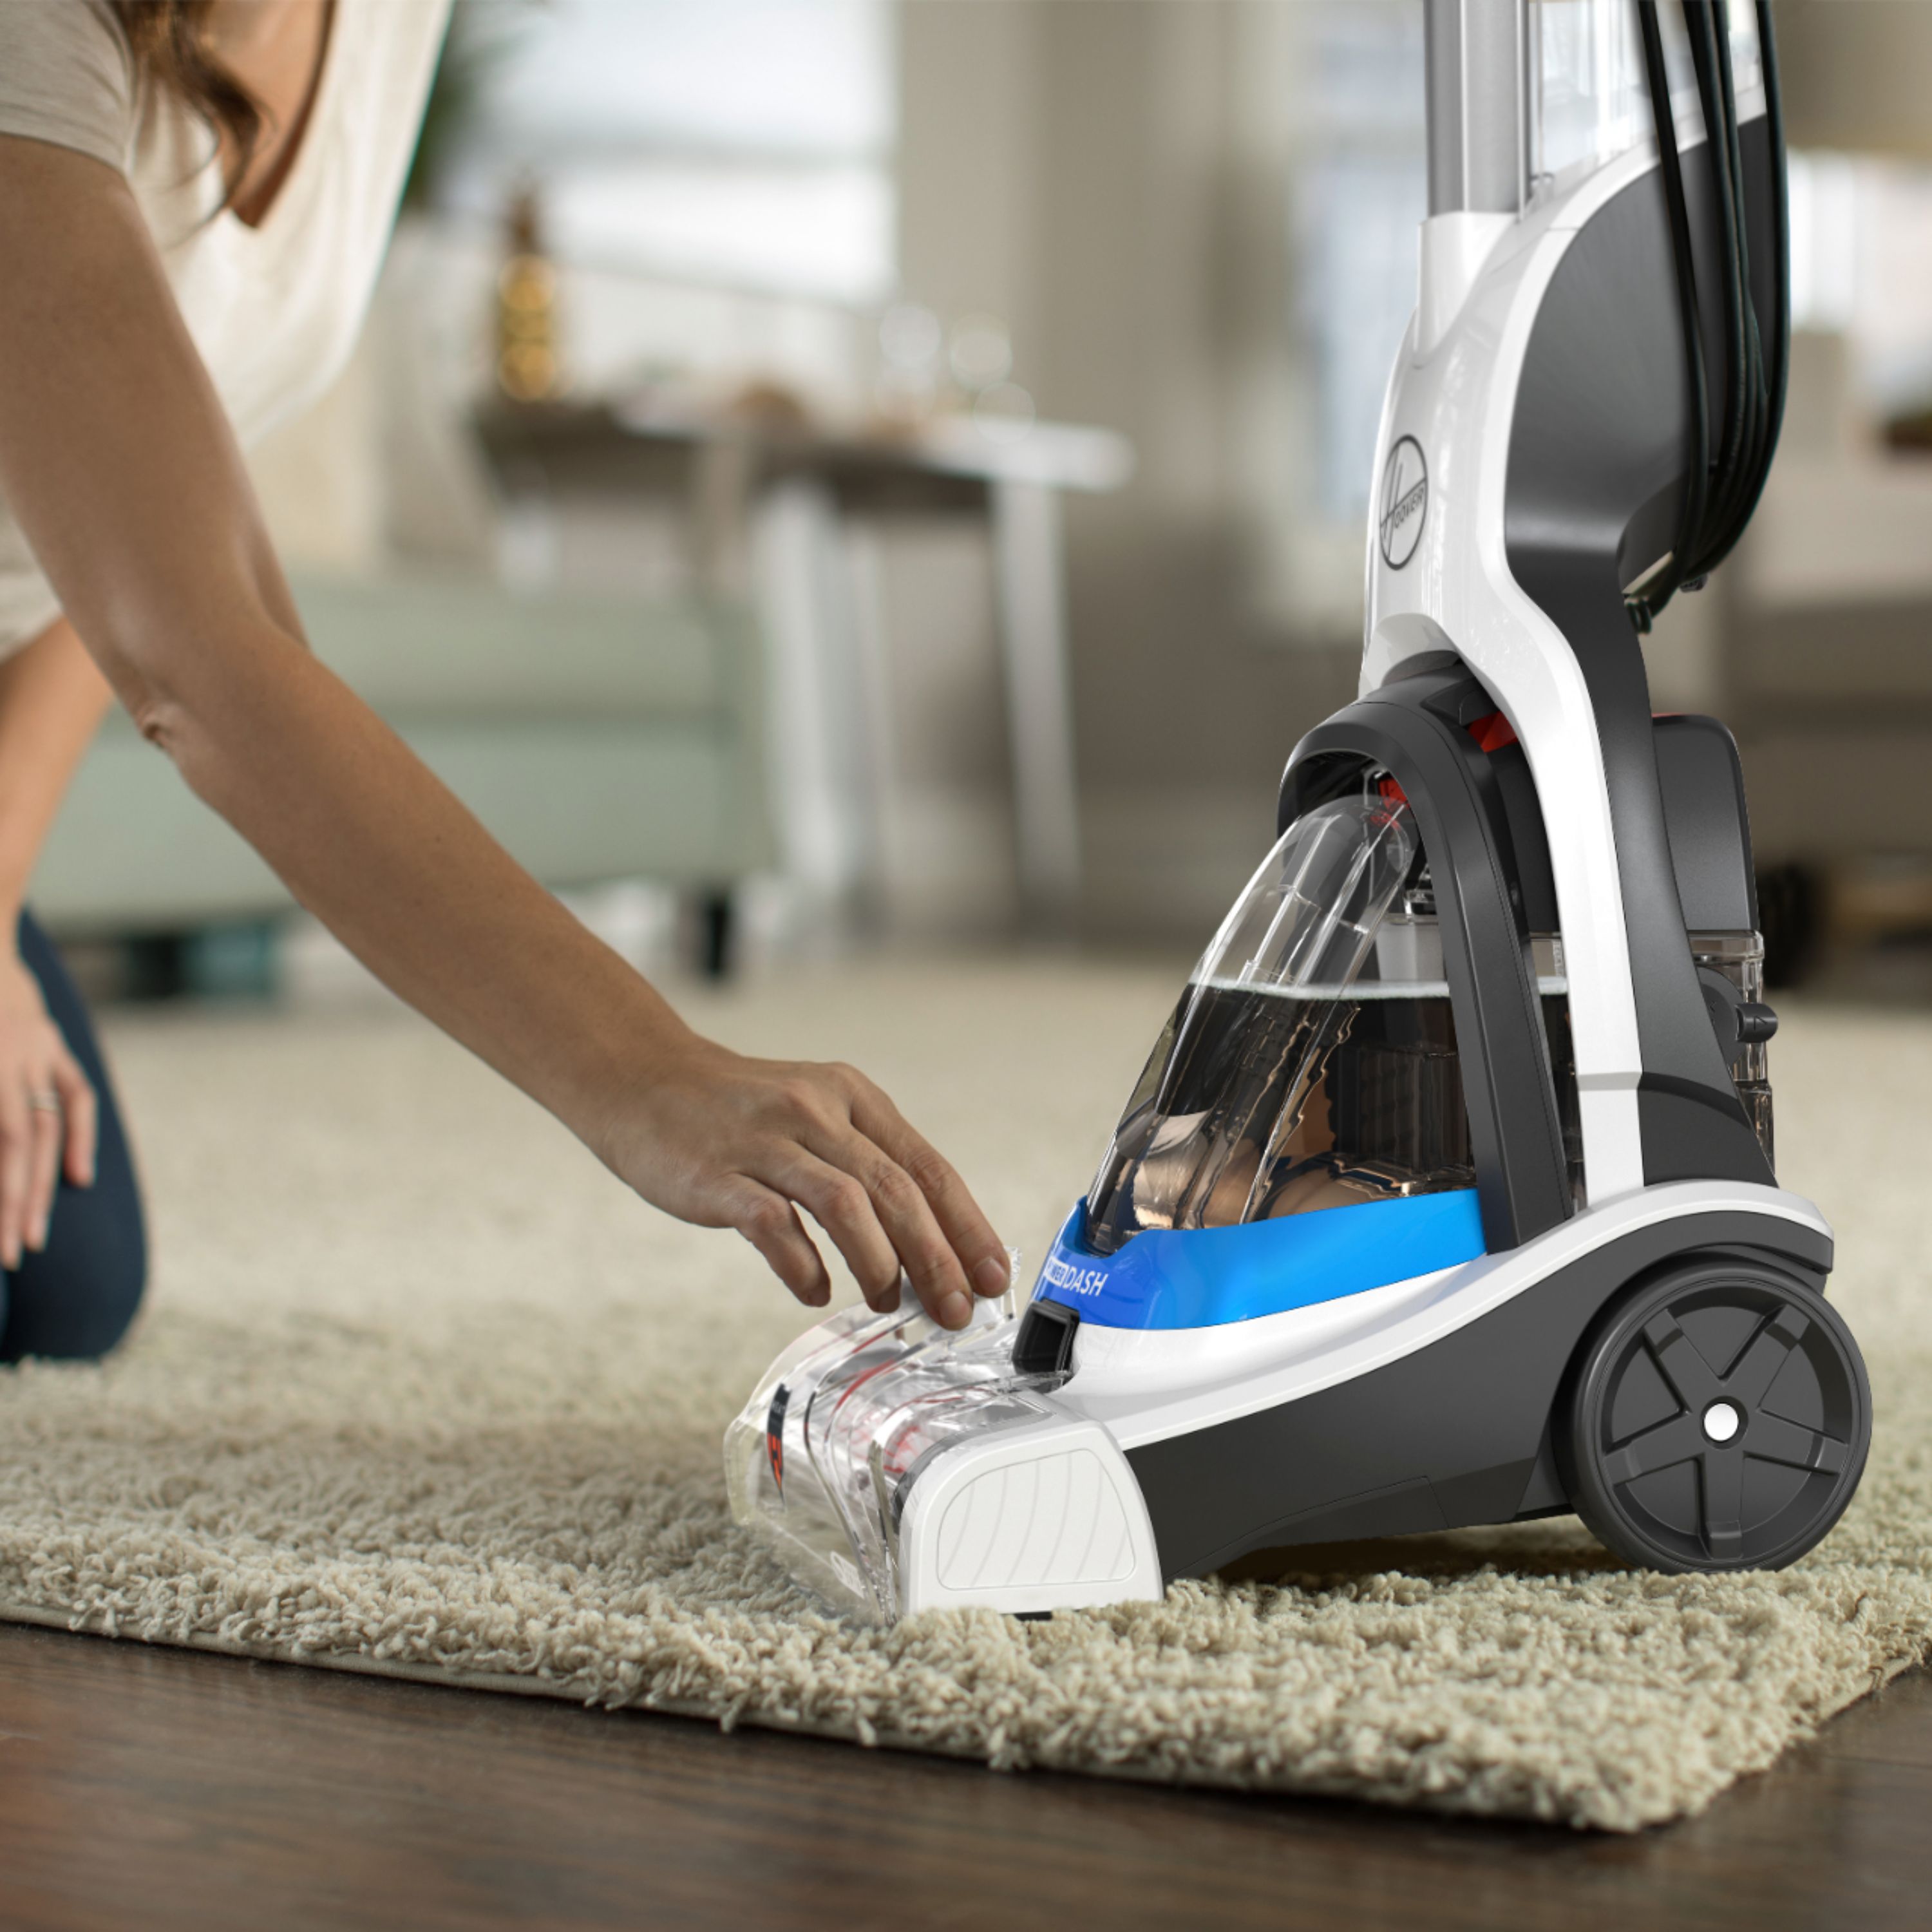 Best Buy: Hoover PowerDash Corded Upright Deep Cleaner White/Blue FH50700